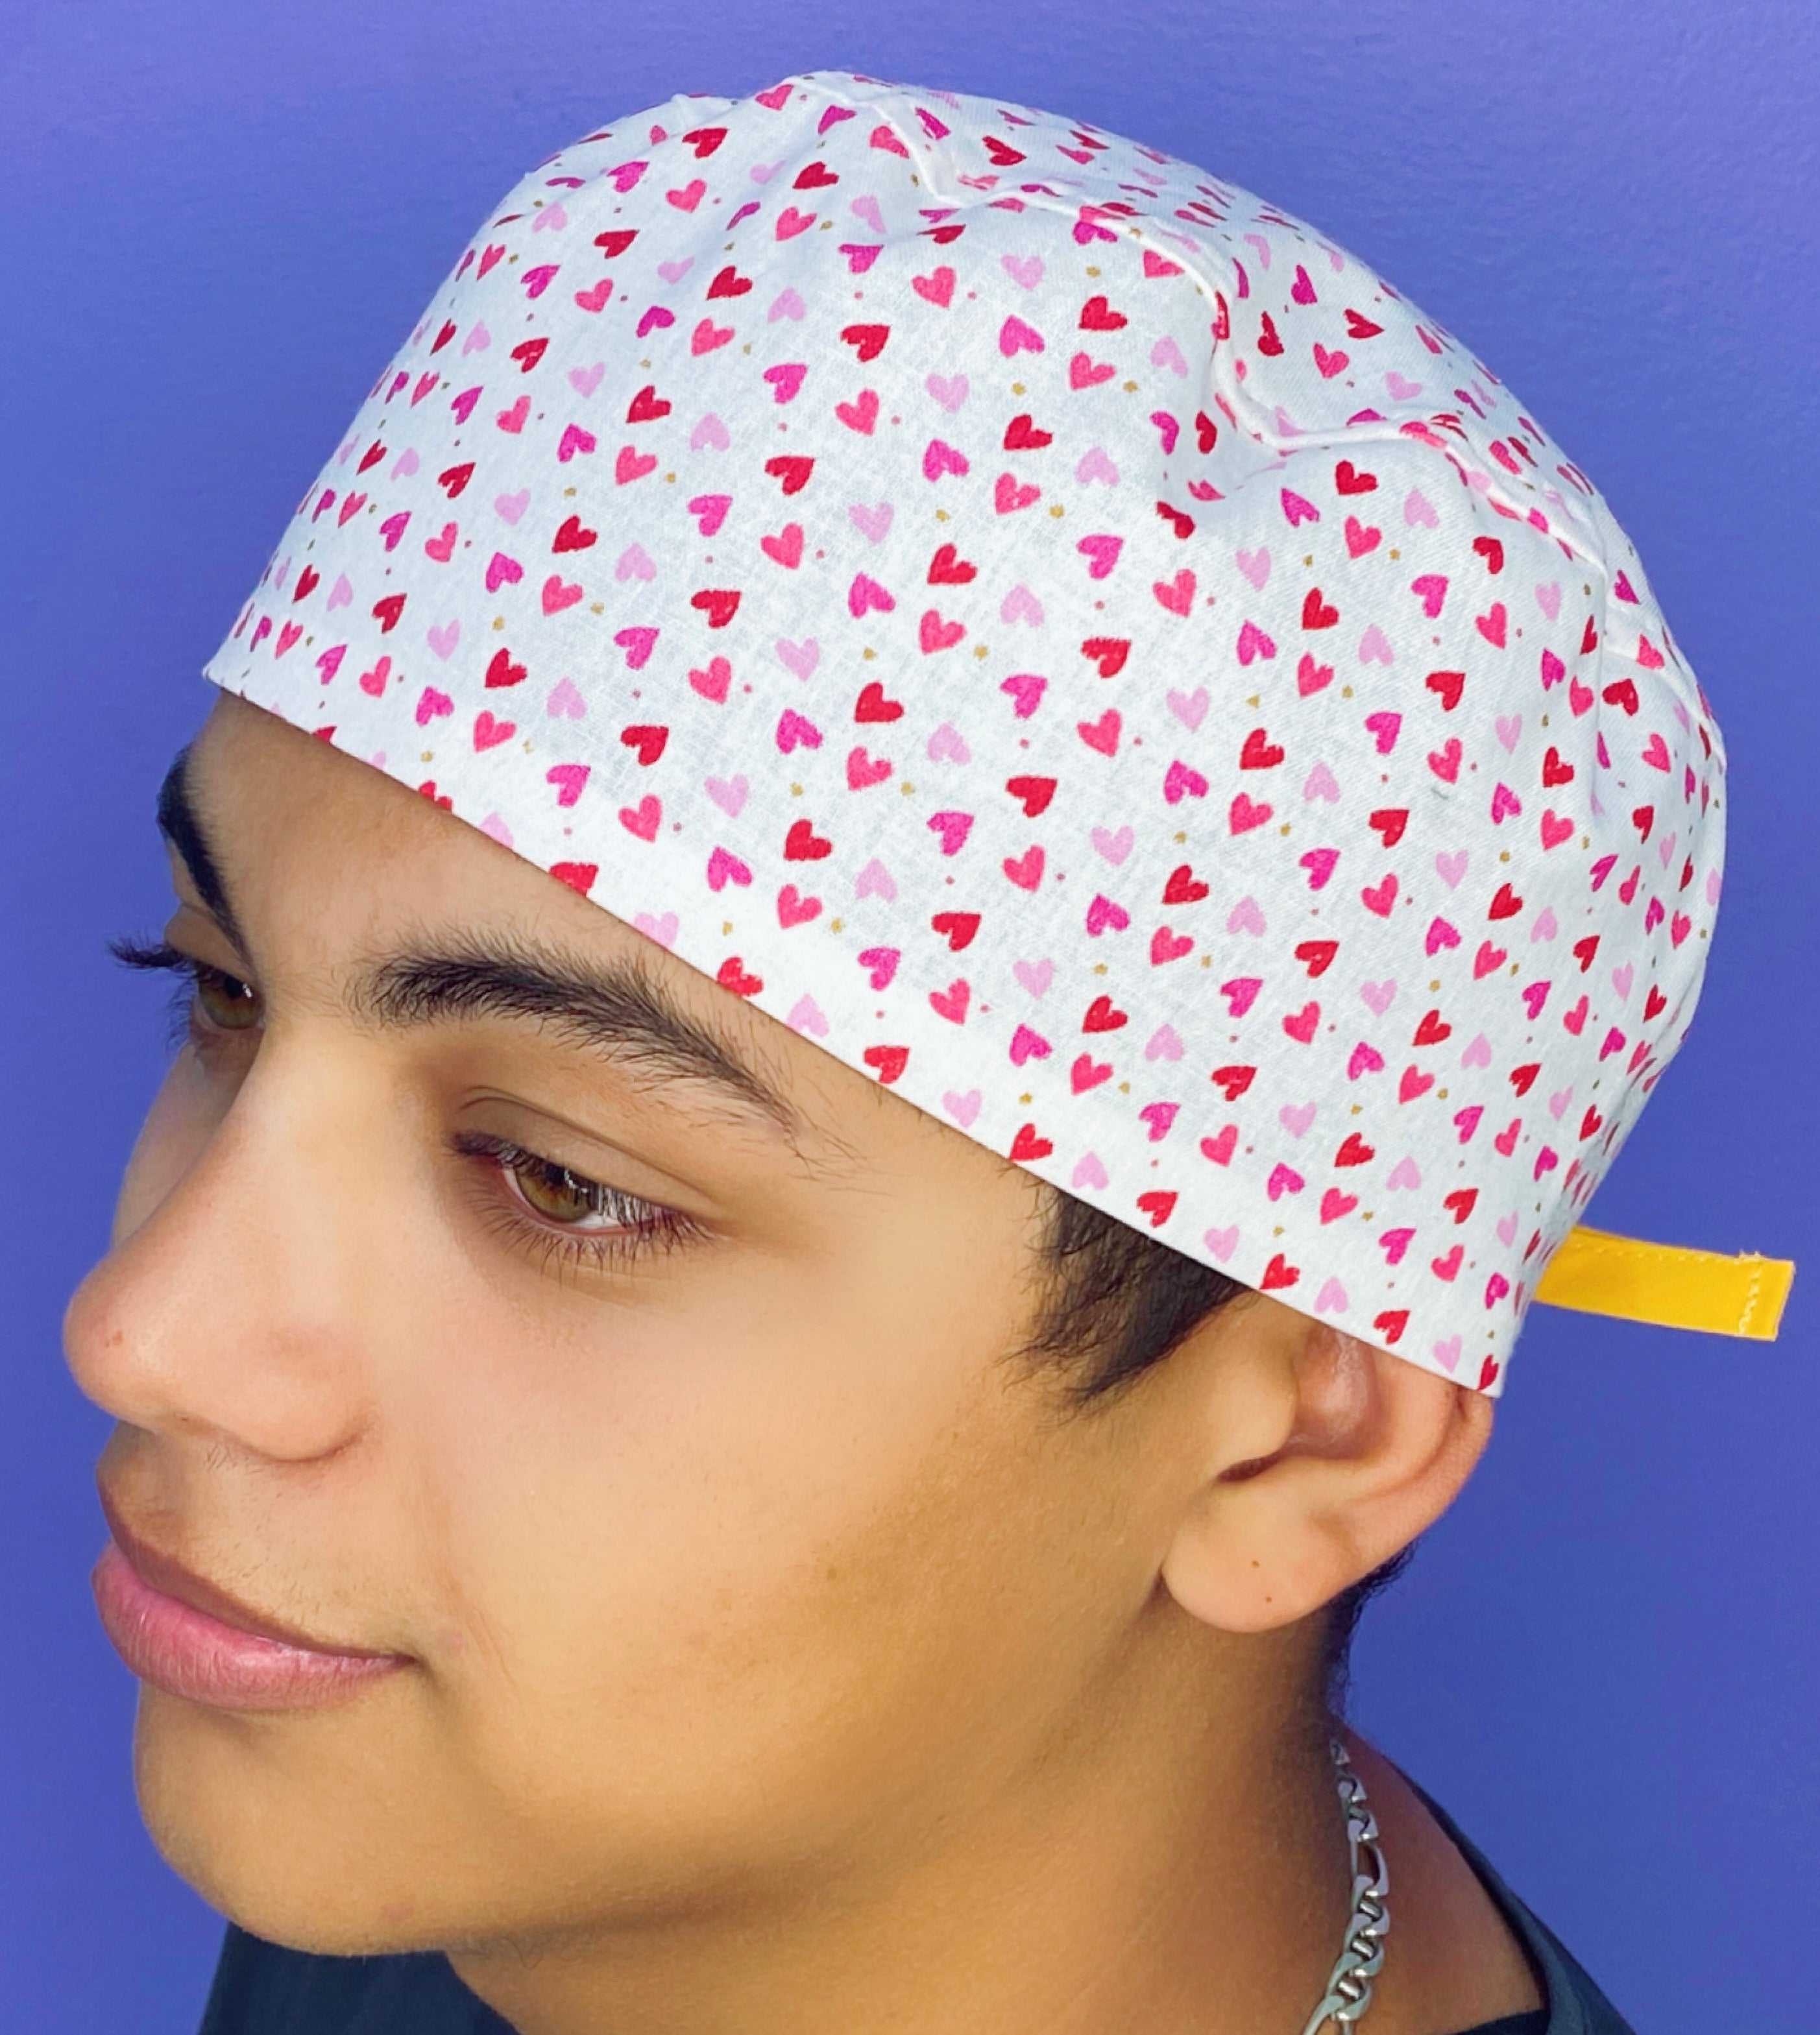 Small Red & Pink Hearts on White Valentine's Day Unisex Holiday Scrub Cap